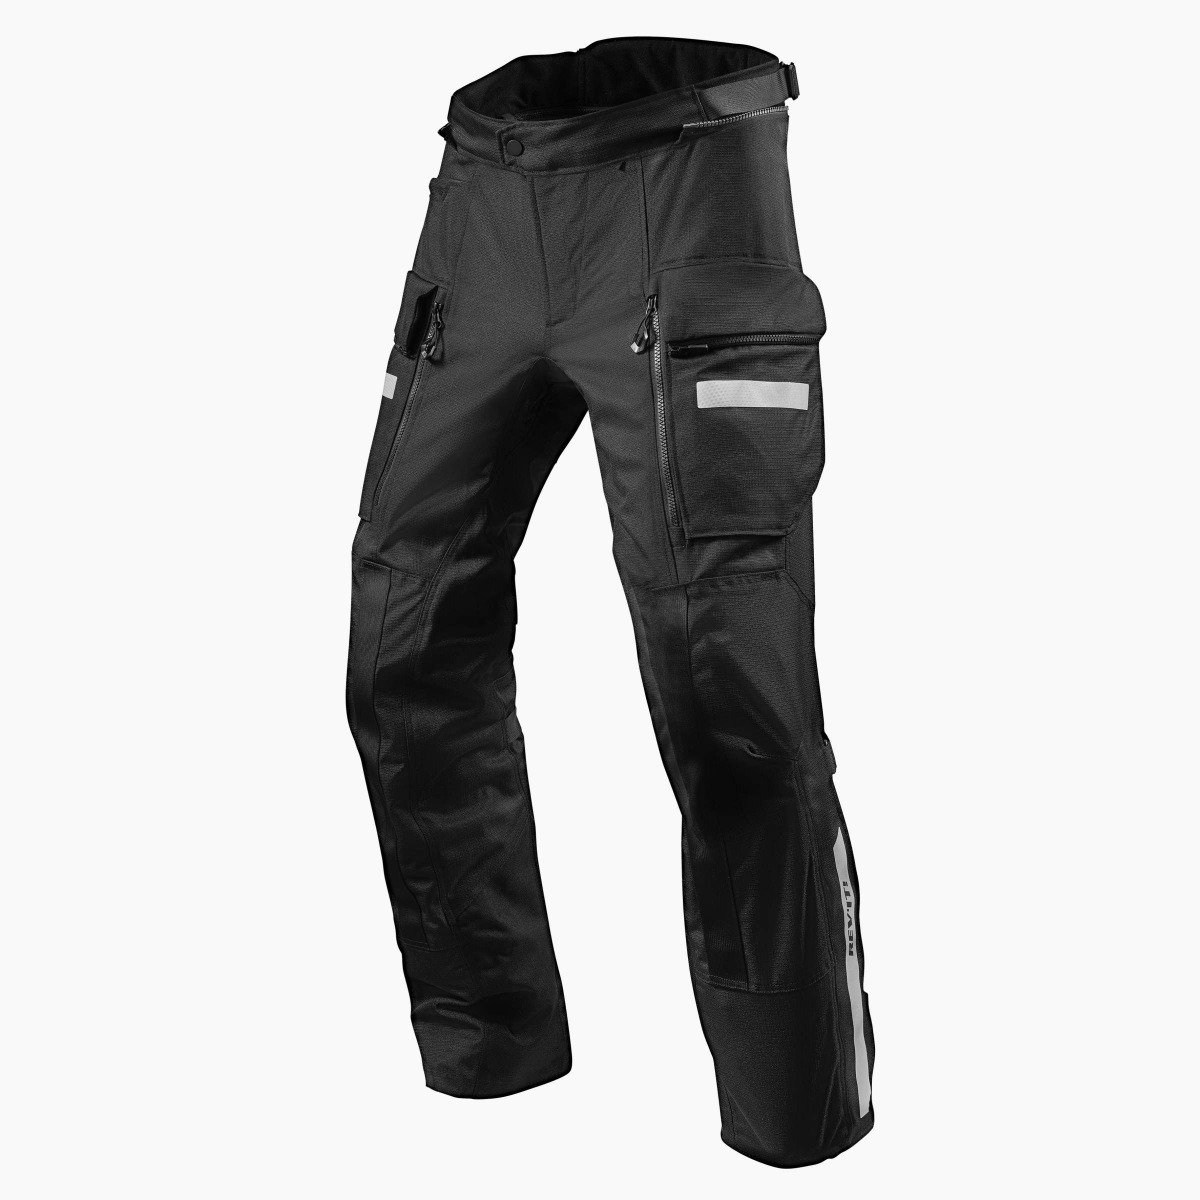 Image of REV'IT! Sand 4 H2O Short Black Motorcycle Pants Size XL ID 8700001316347